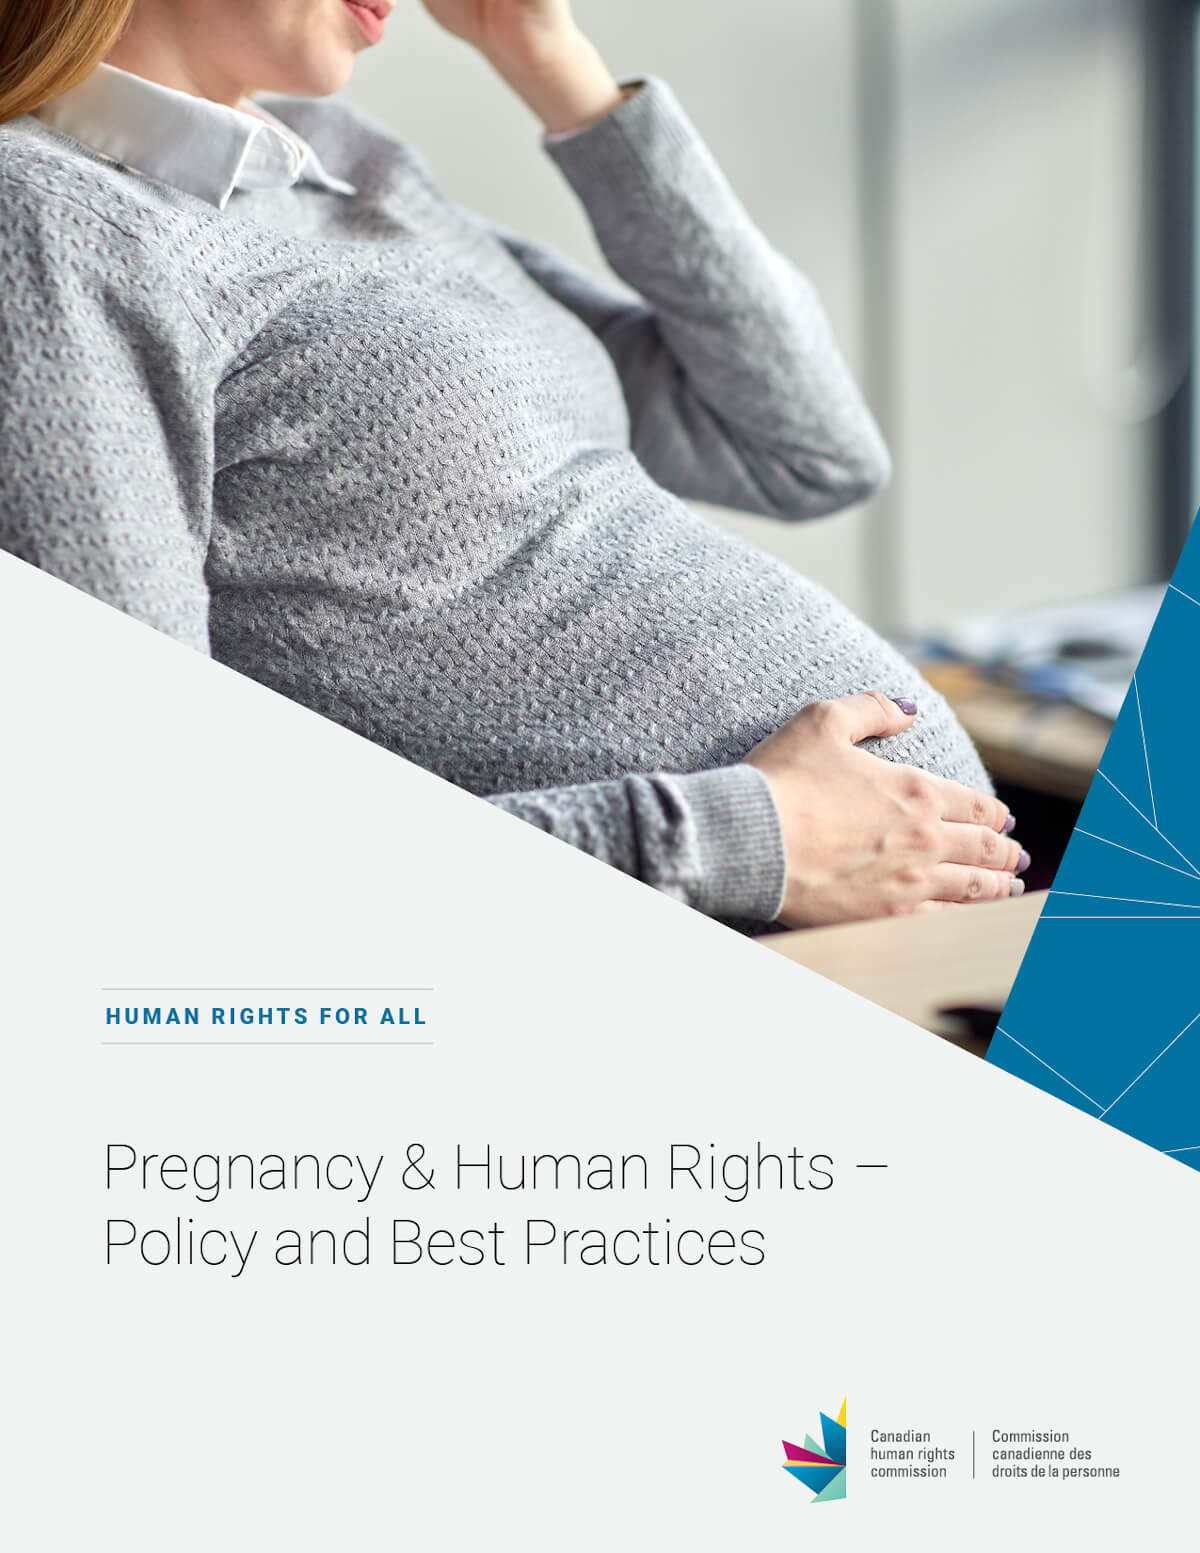 Pregnancy & Human Rights in the Workplace - Policy and Best Practices 